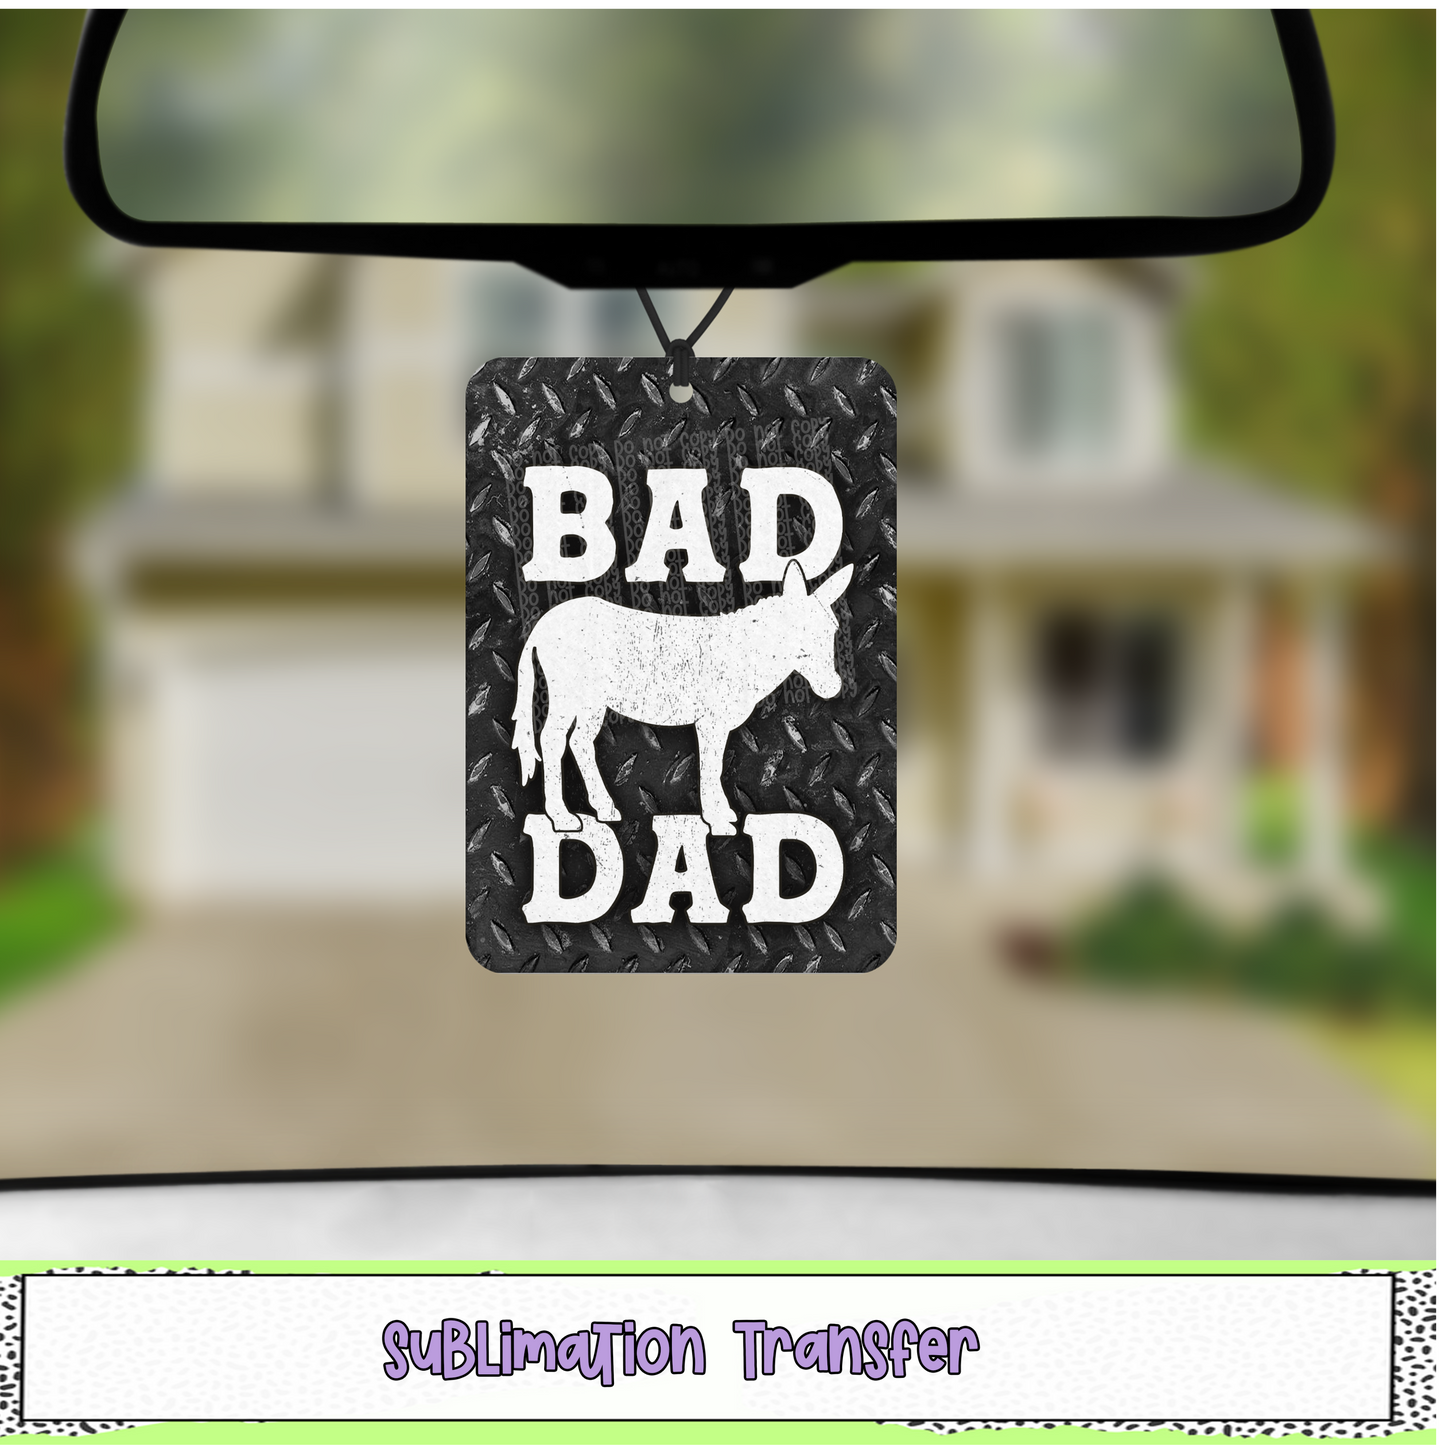 Bad Ass Dad - Air Freshener Sublimation Transfer - RTS